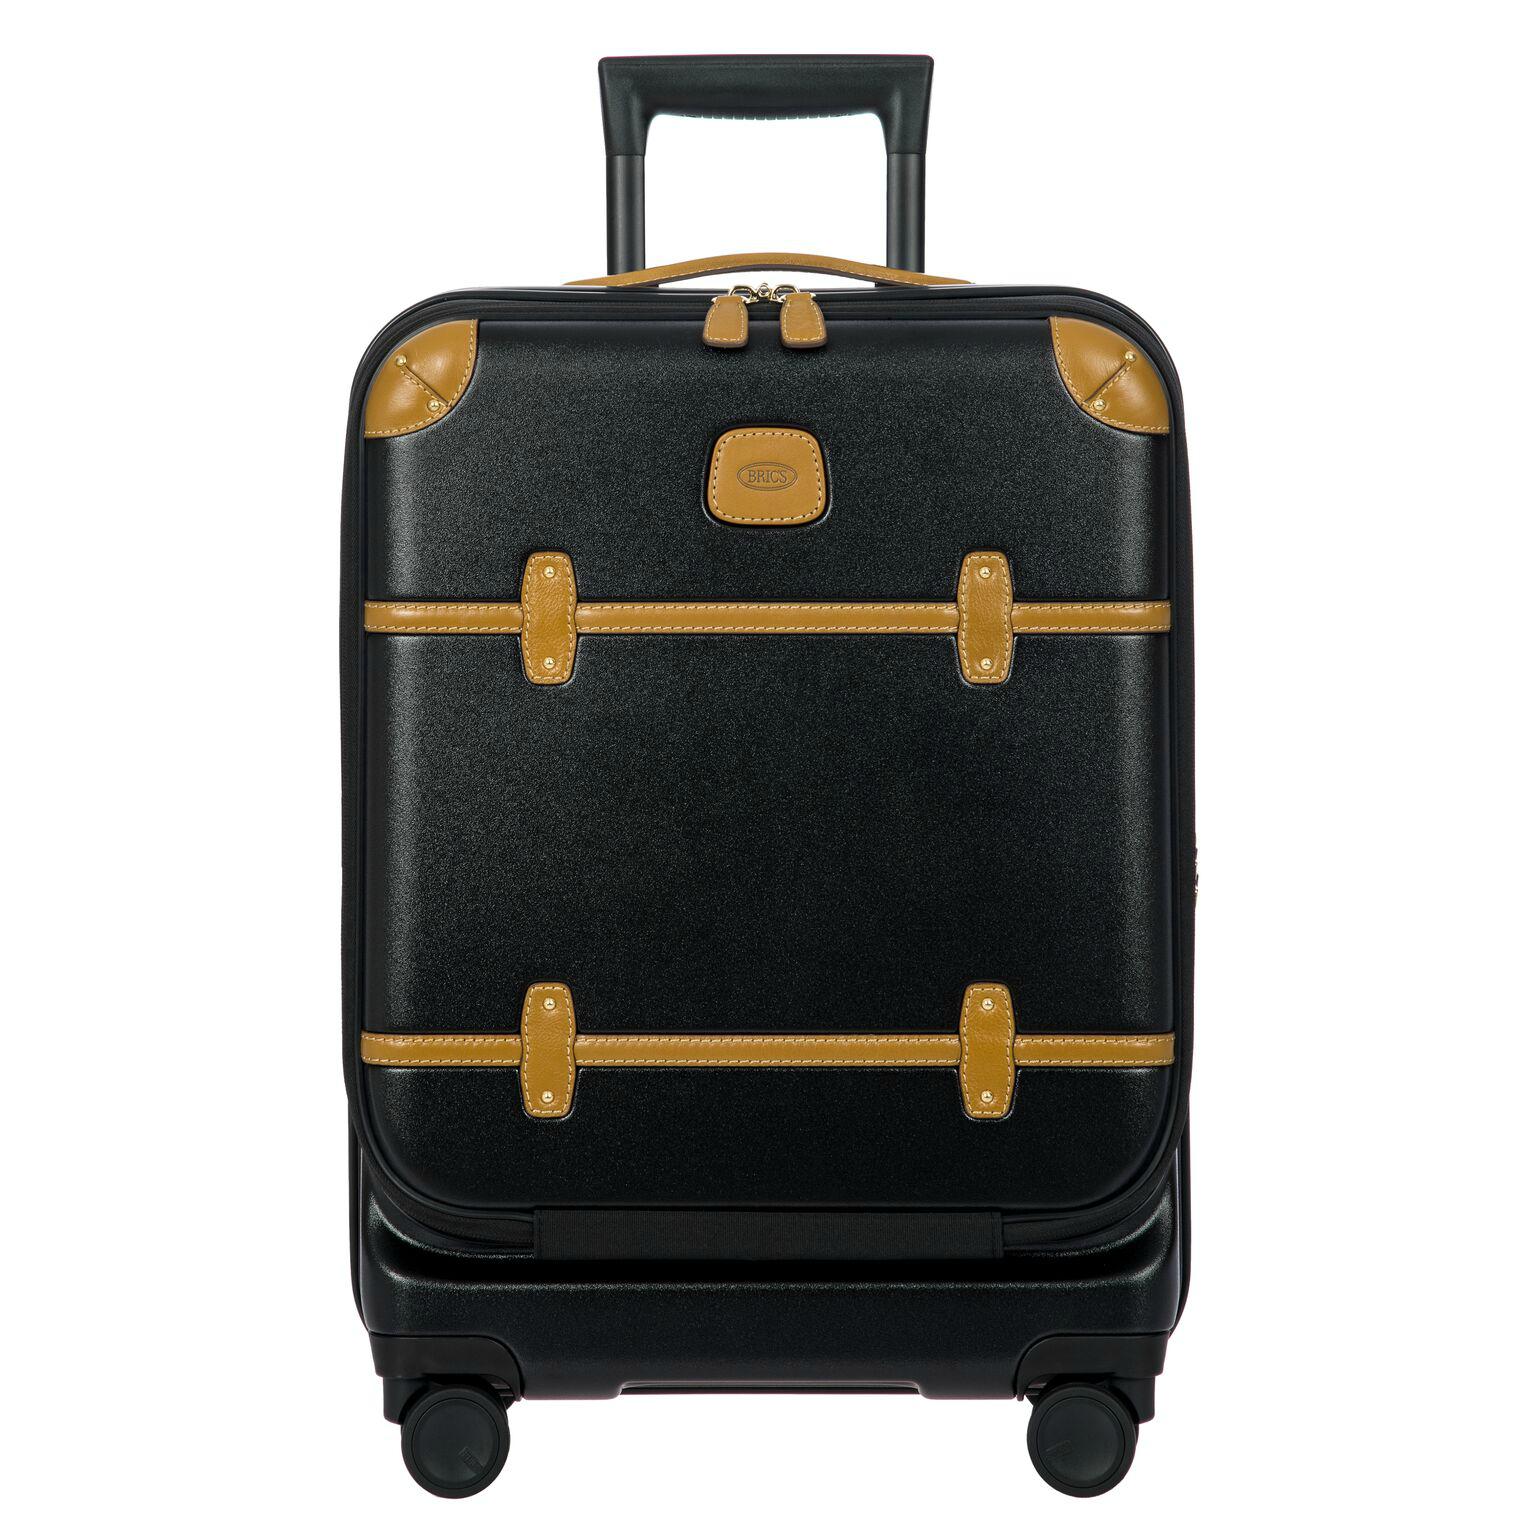 Brics Bellagio 2.0 21" Carry-On Spinner with Pocket – Luggage Pros